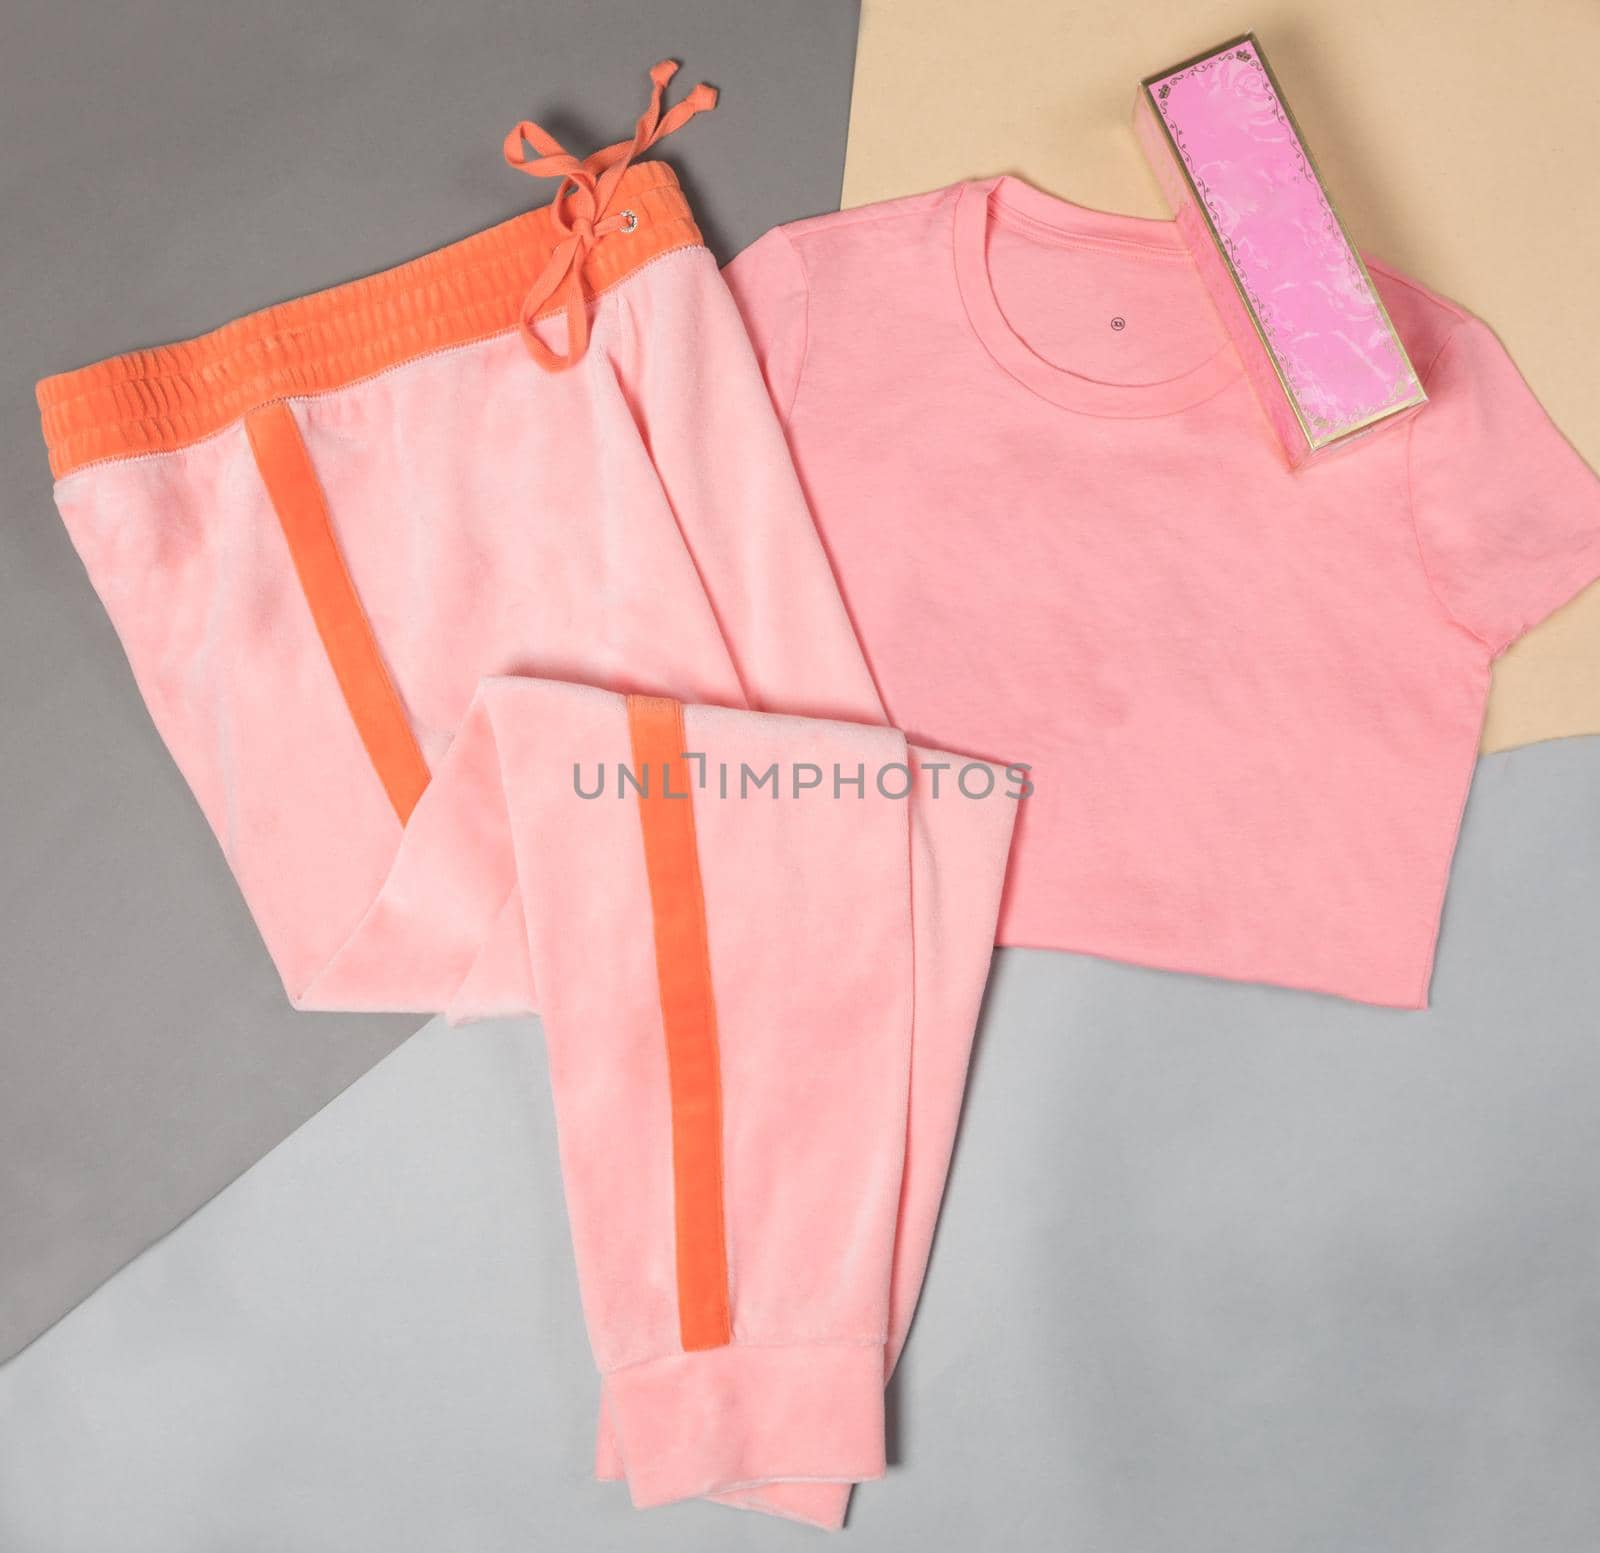 Pink color woman sport wear top view